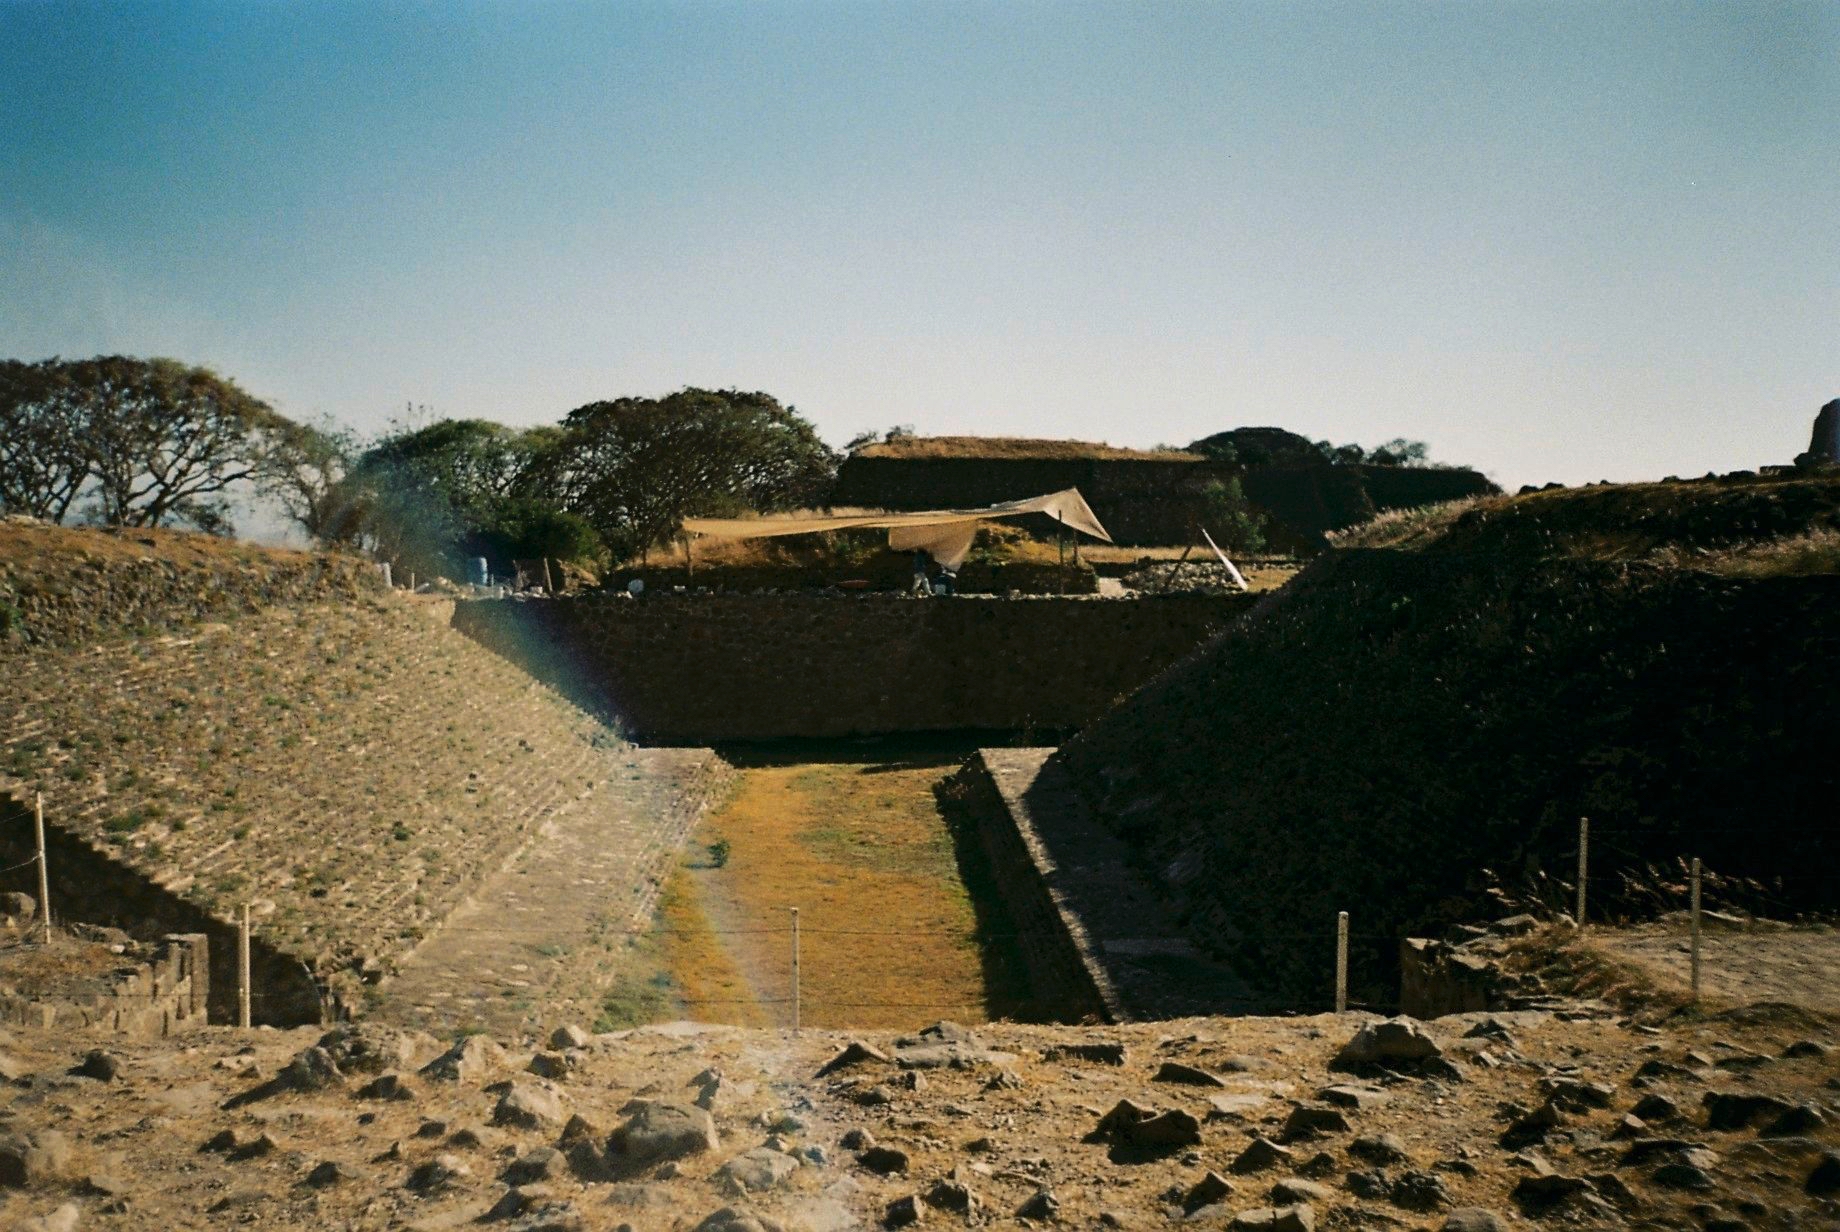 Monte Alban 01-2020 - 5 of 33